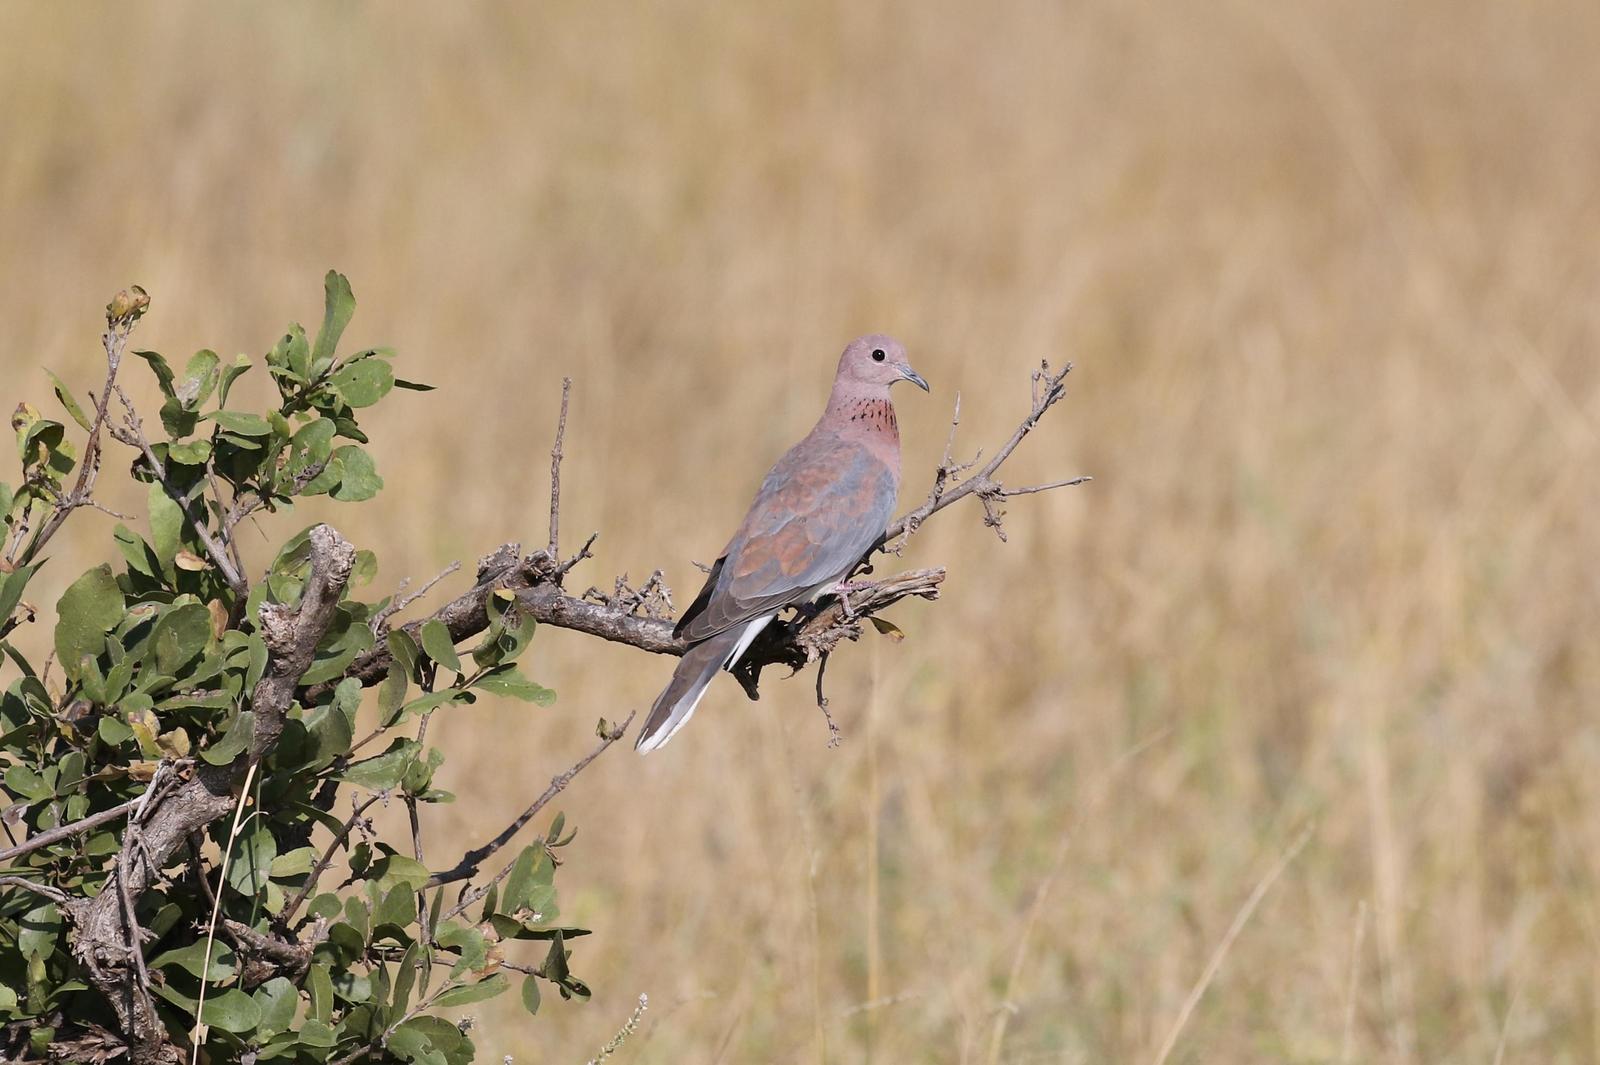 Laughing Dove Photo by Nate Dias